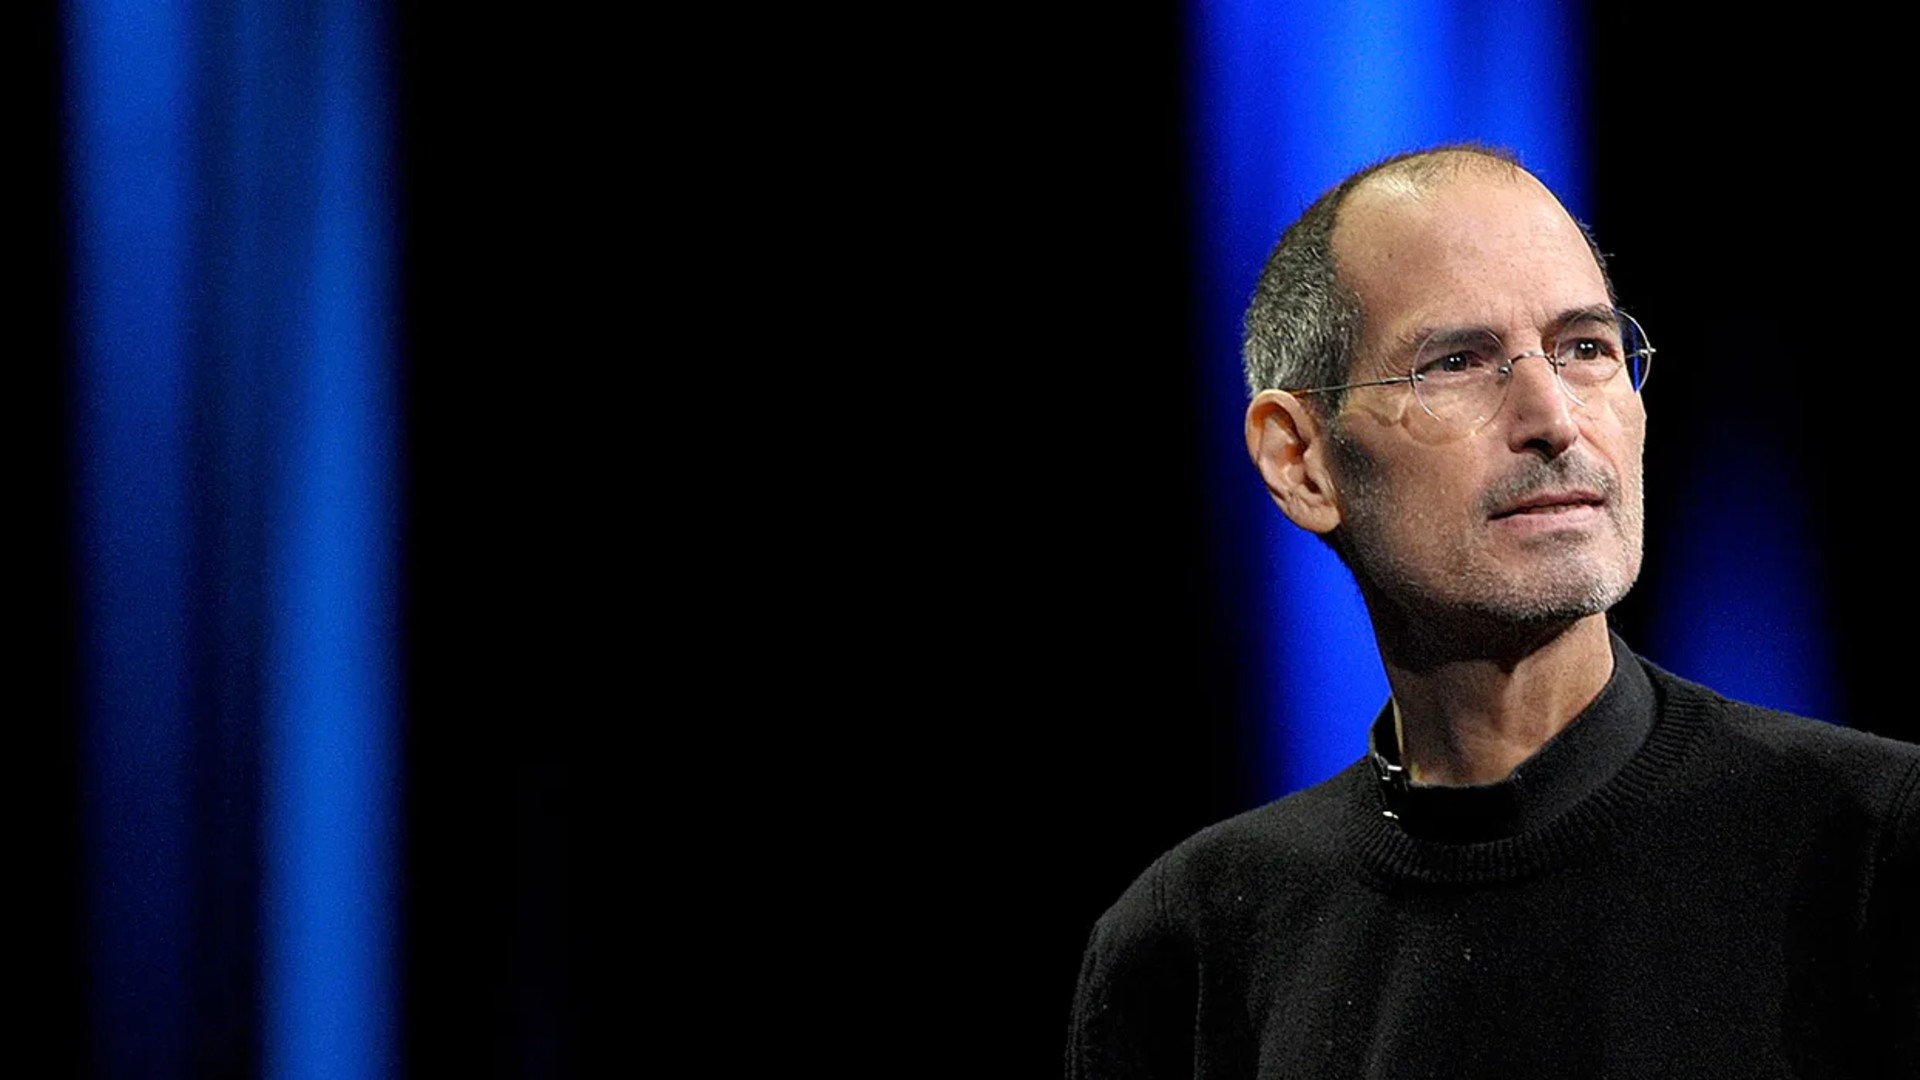 Steve Job’s Handwritten Job Application From 1973 Is Up For Auction